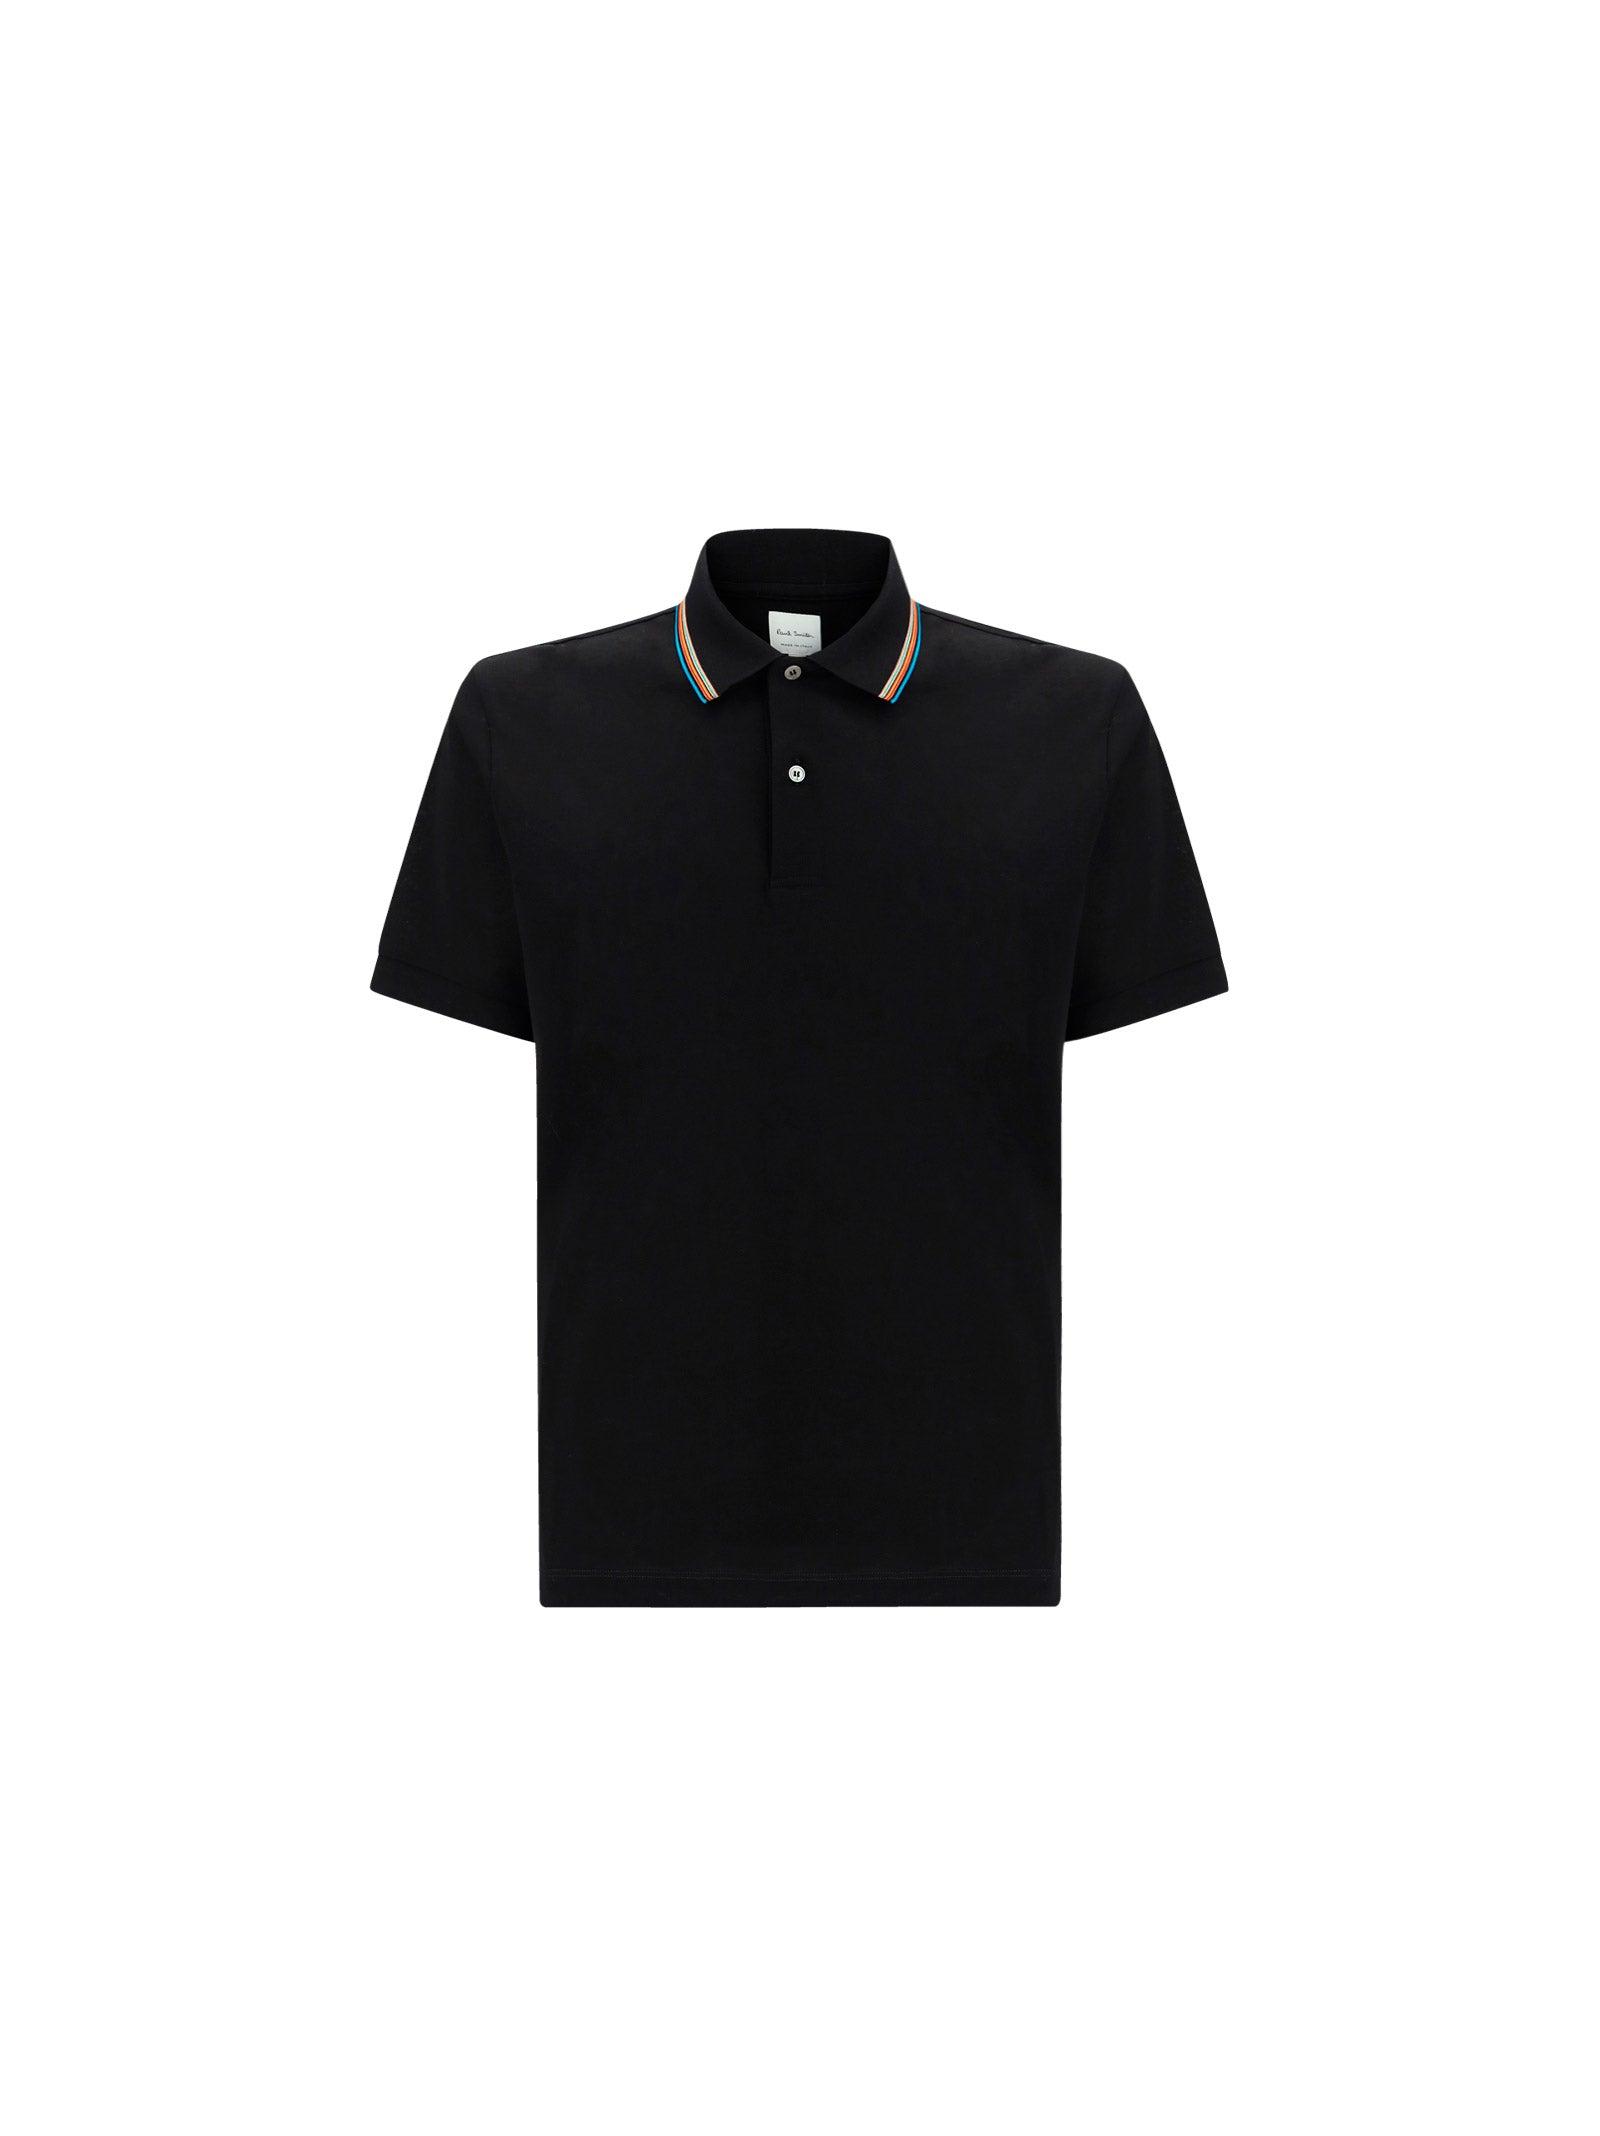 Paul Smith Polo Shirt in Black for Men | Lyst